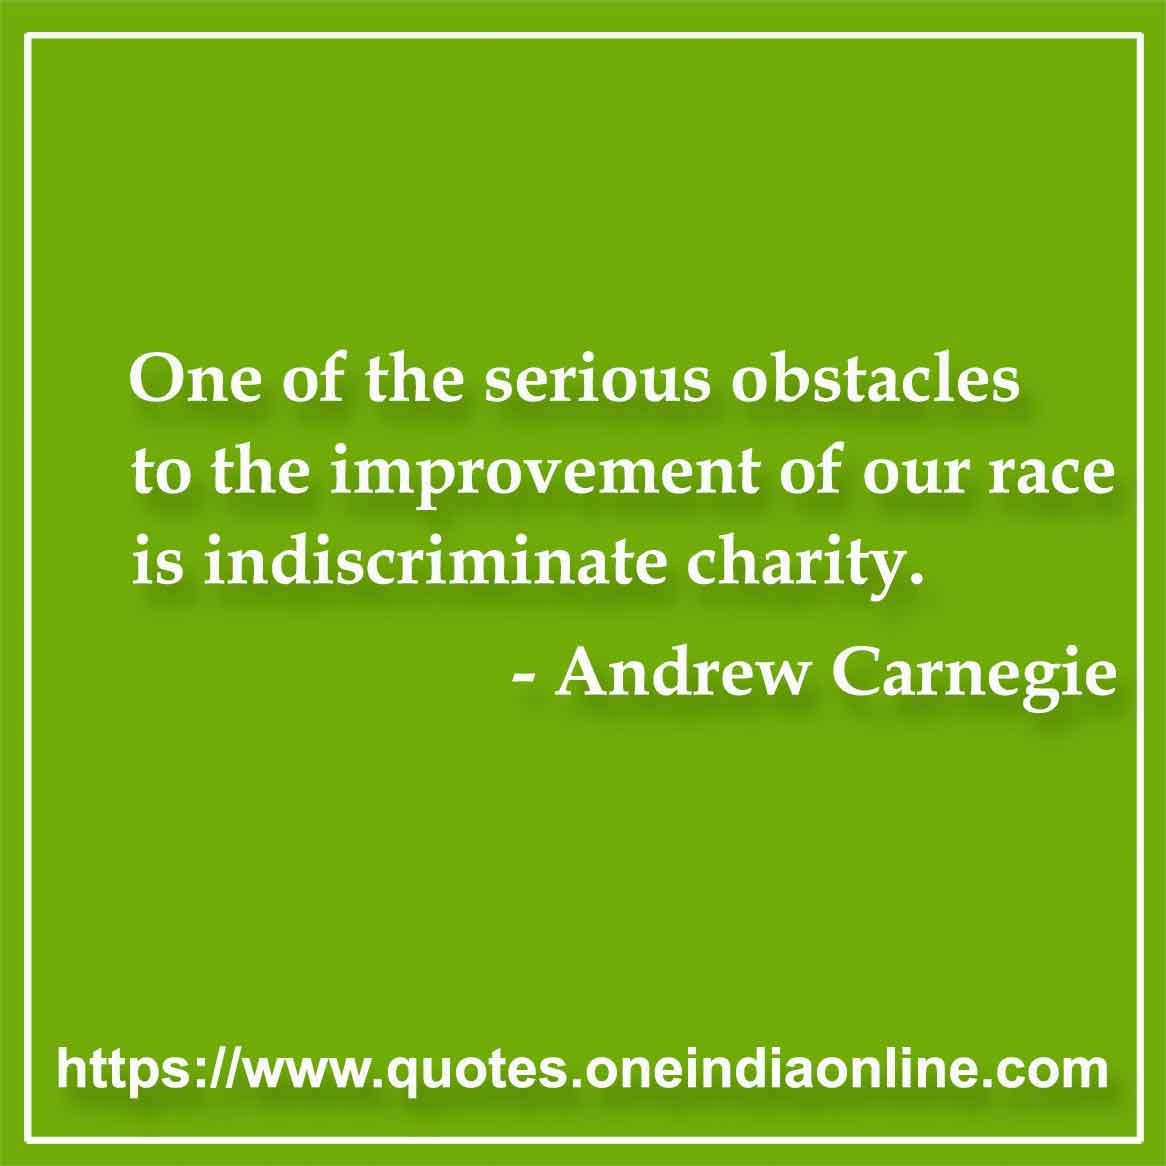 One of the serious obstacles to the improvement of our race is indiscriminate charity. Andrew Carnegie